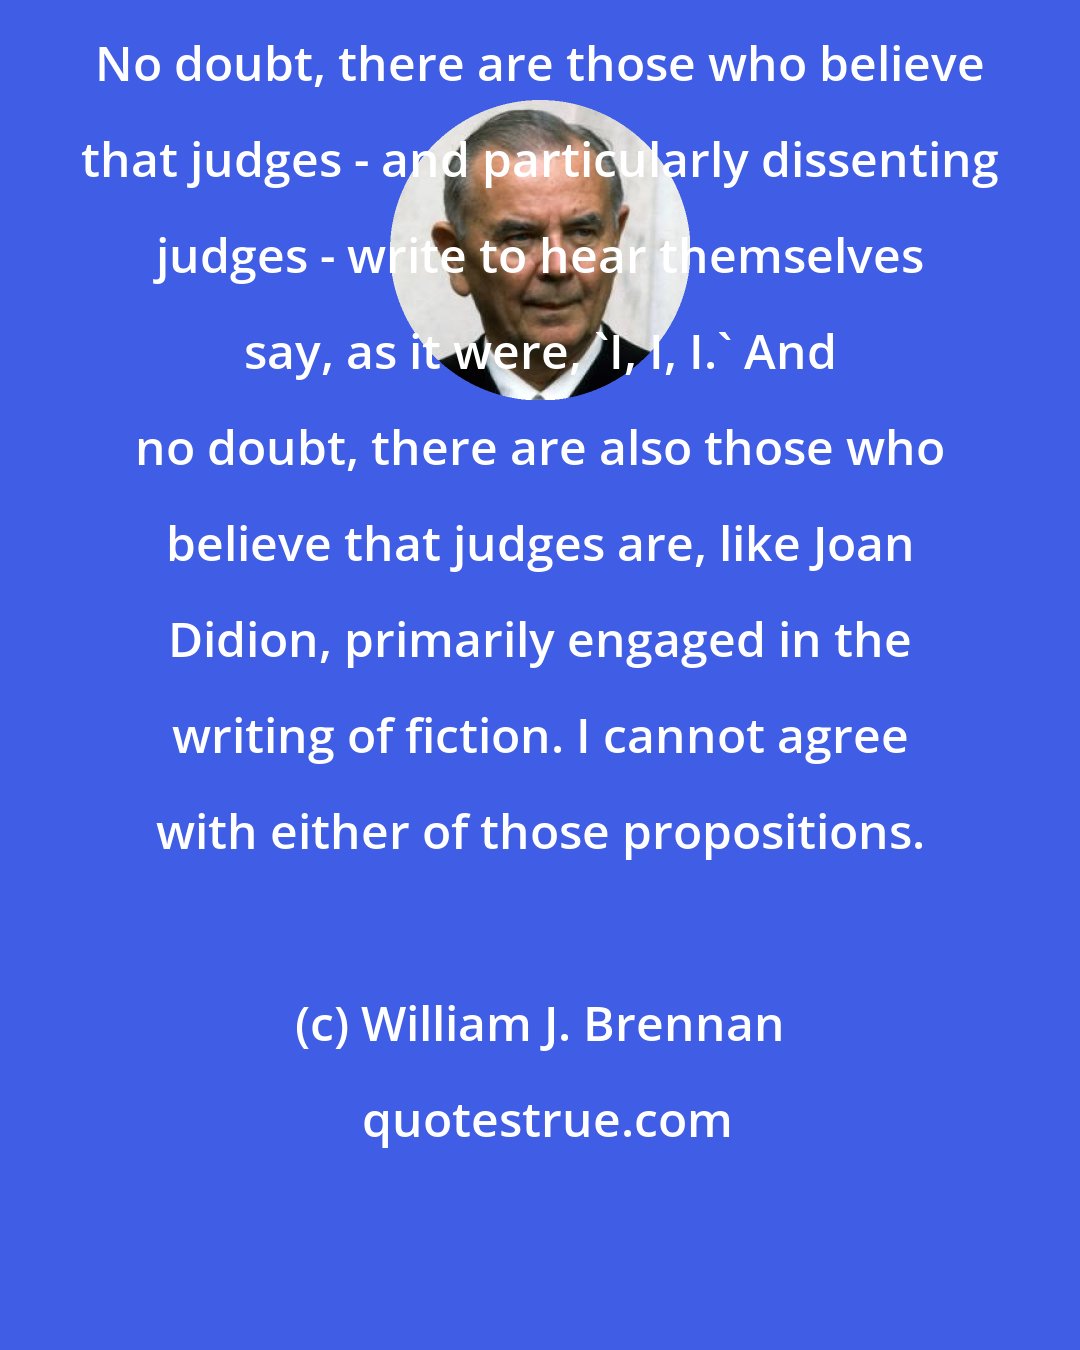 William J. Brennan: No doubt, there are those who believe that judges - and particularly dissenting judges - write to hear themselves say, as it were, 'I, I, I.' And no doubt, there are also those who believe that judges are, like Joan Didion, primarily engaged in the writing of fiction. I cannot agree with either of those propositions.